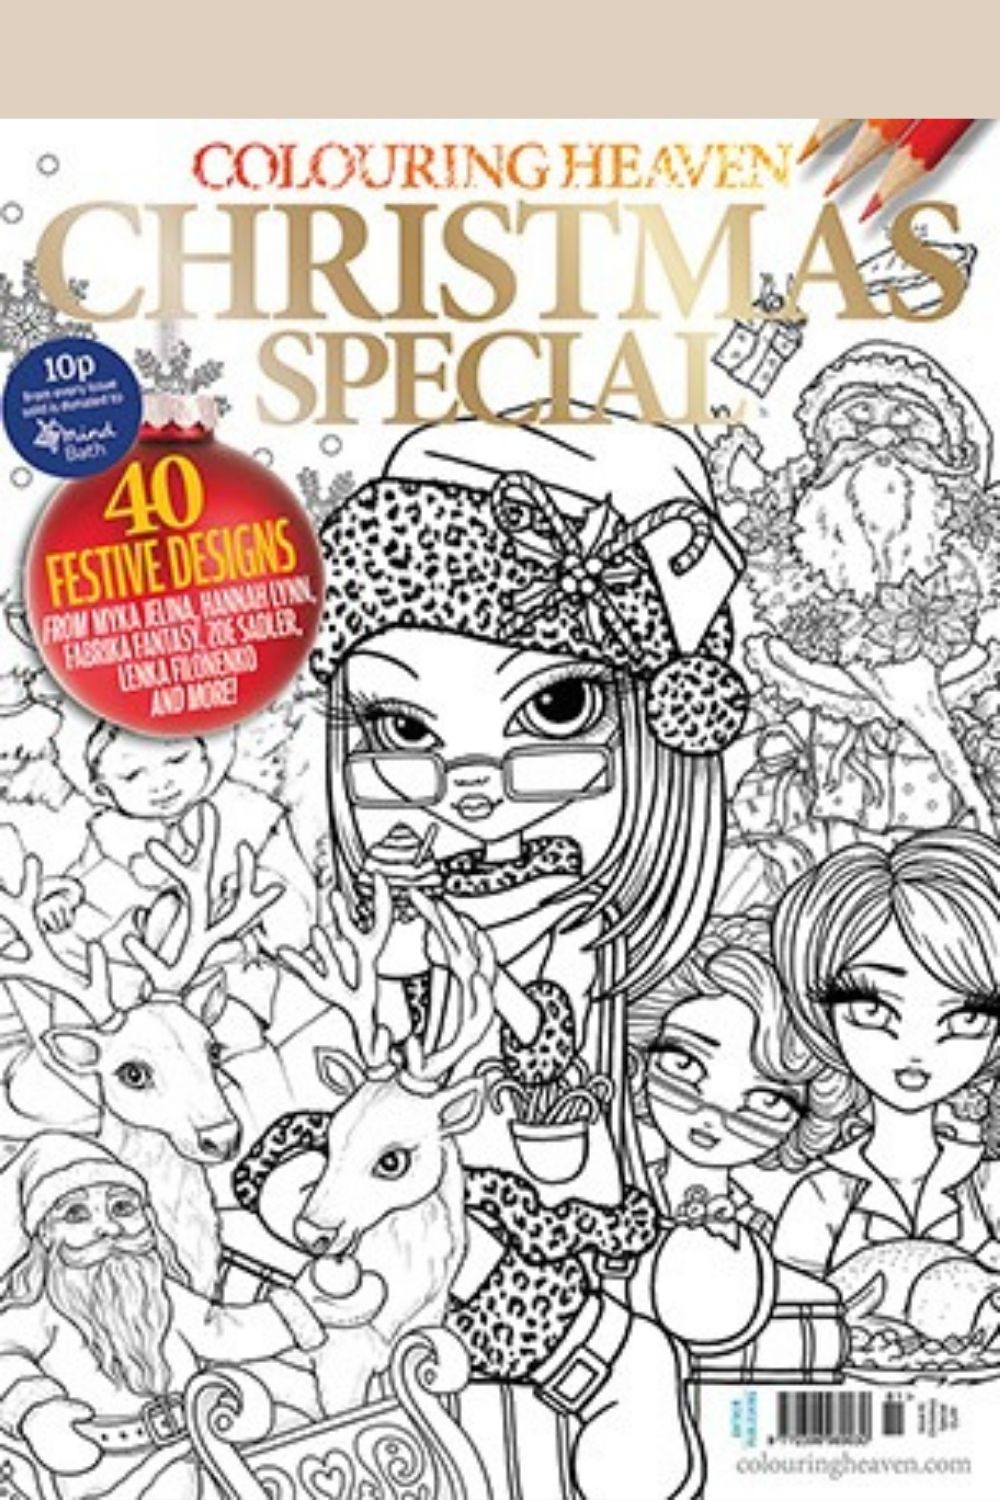 Colouring Heaven Issue 81 Christmas Special